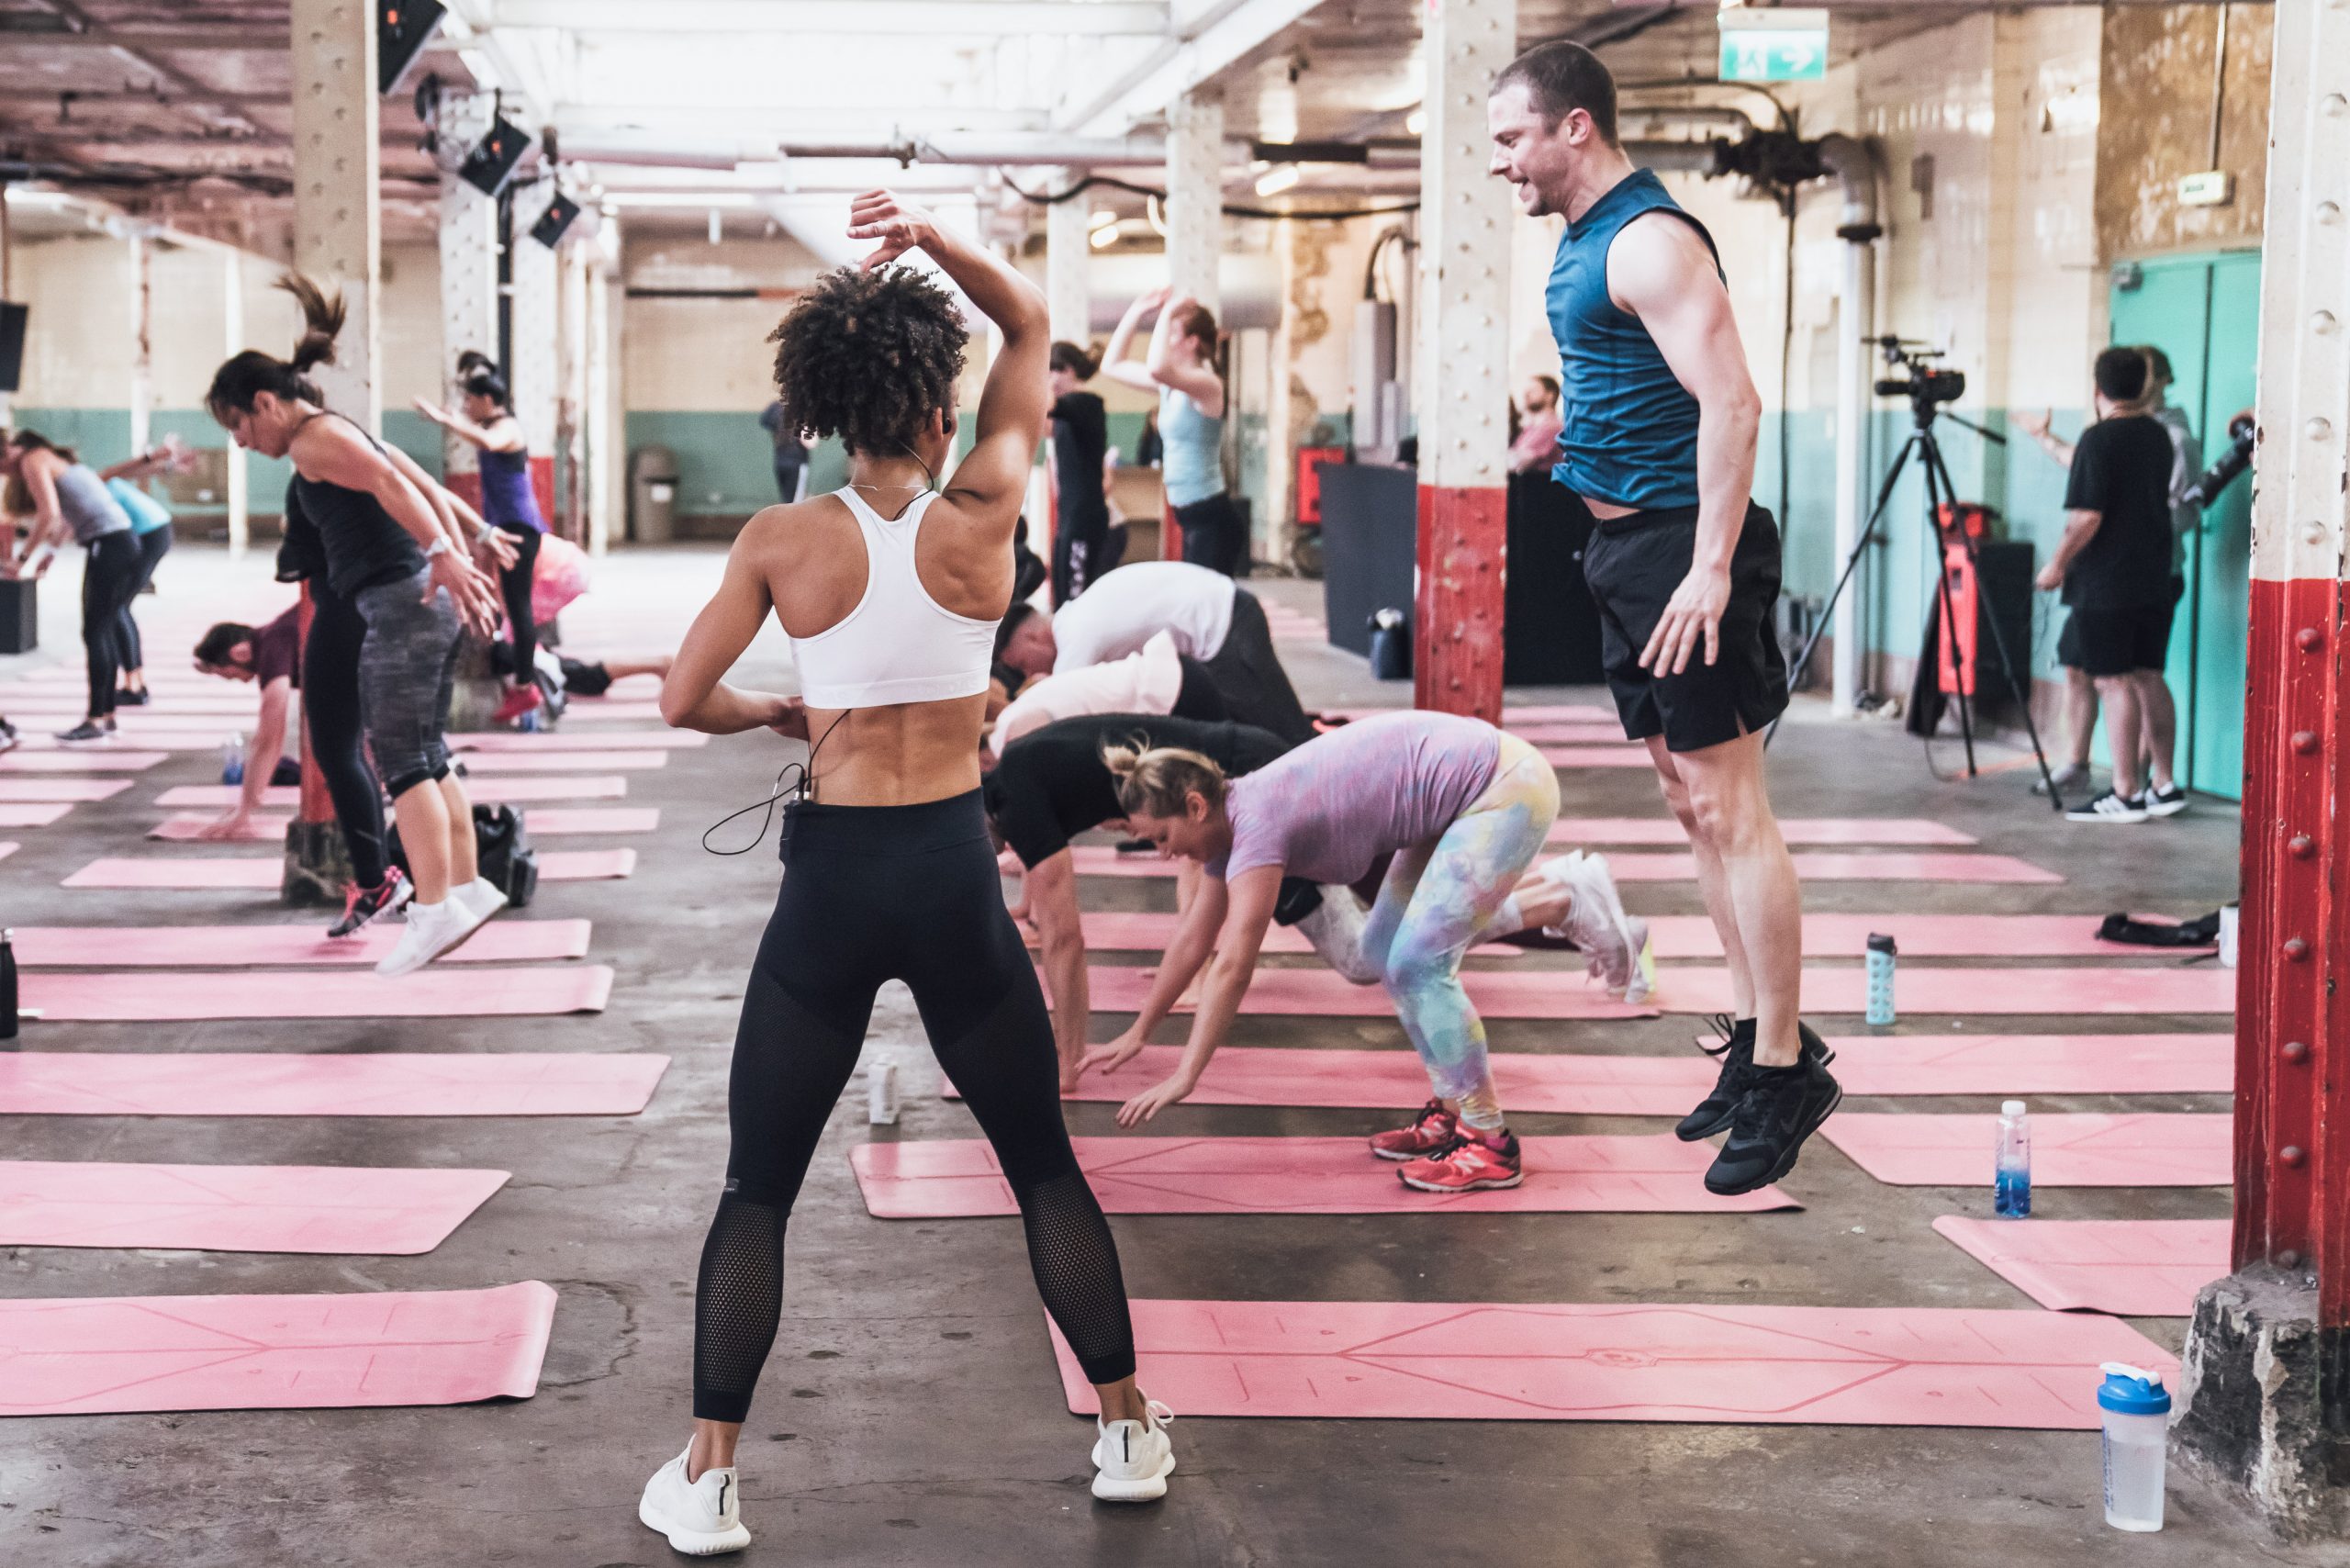 Balance Festival Returns To London With Expanded Lineup In Bid To Drive The Wellness Revolution